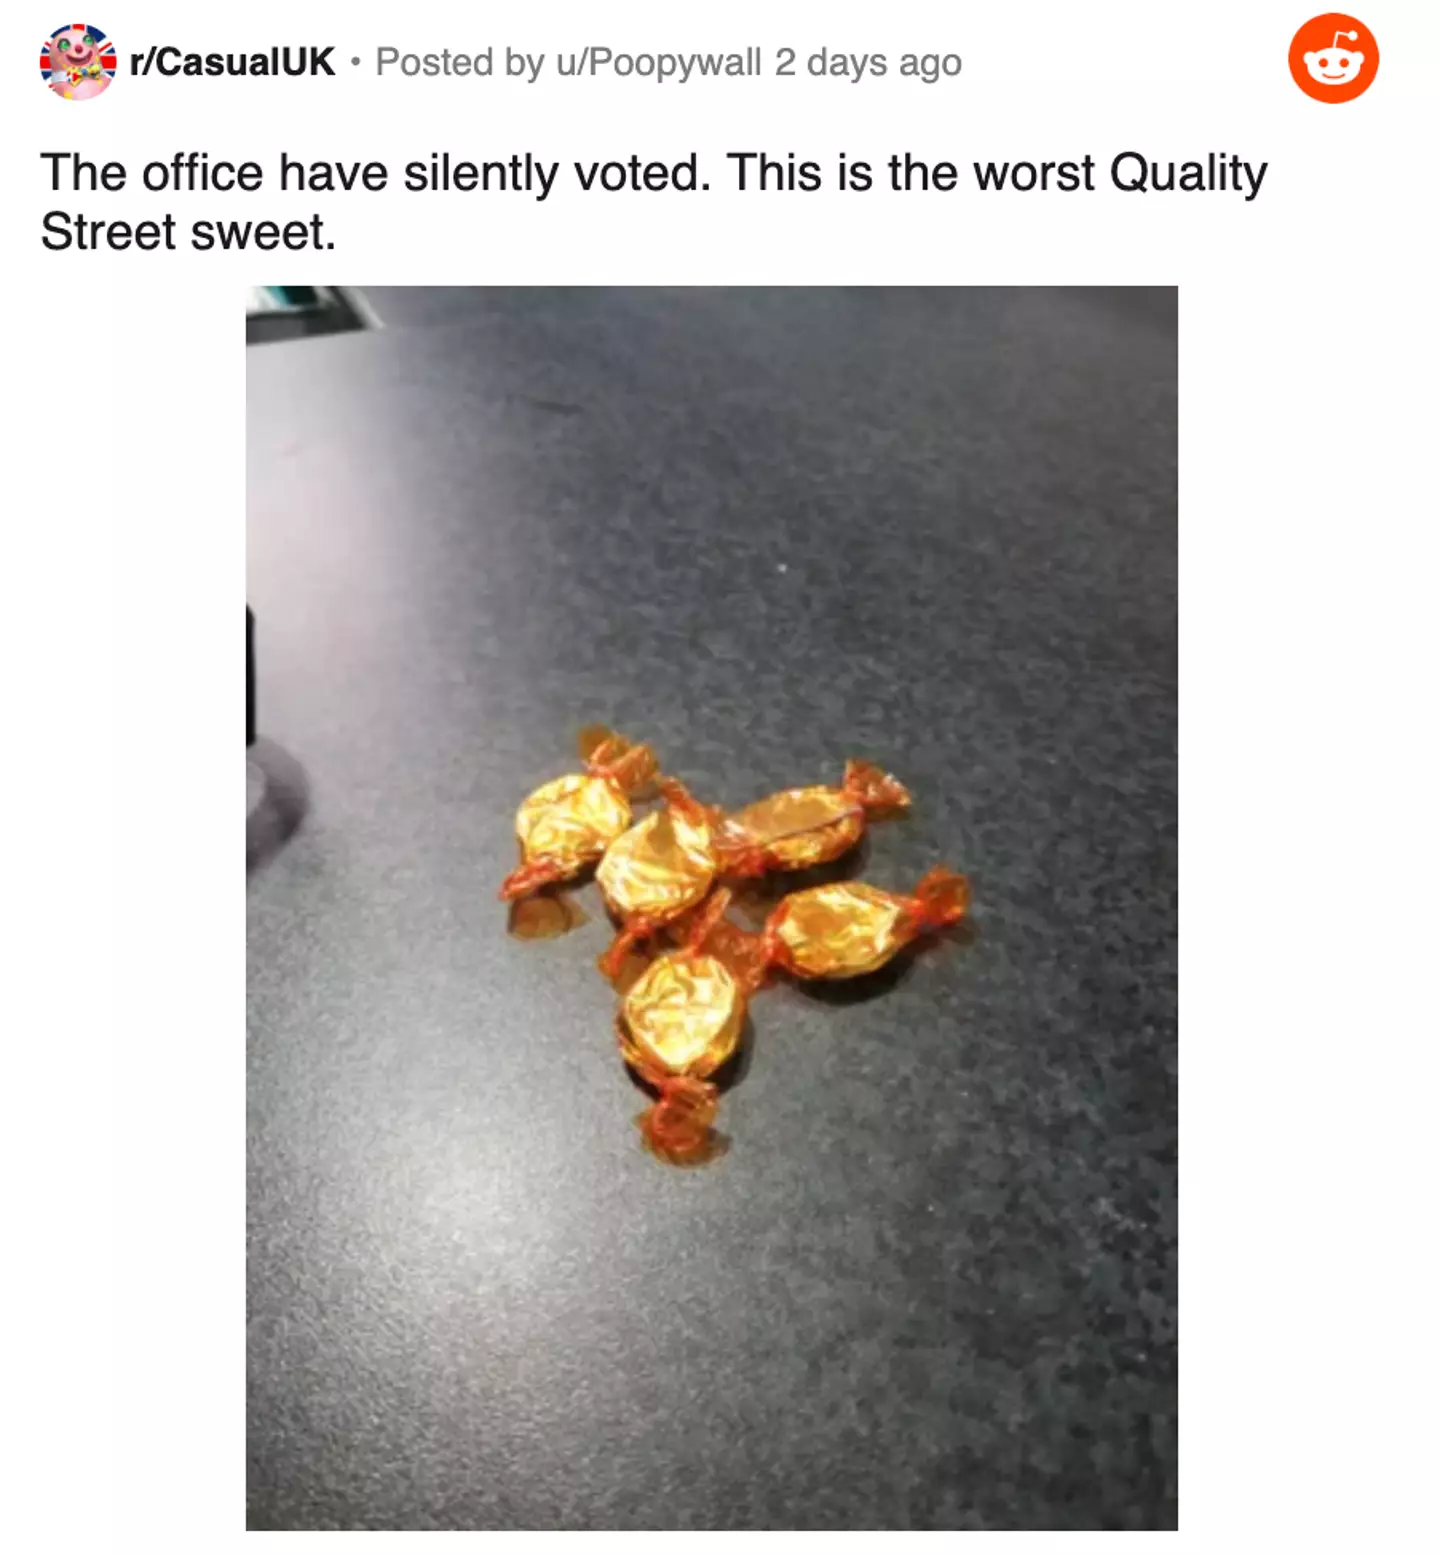 The worst Quality Street sweet is the toffee penny.